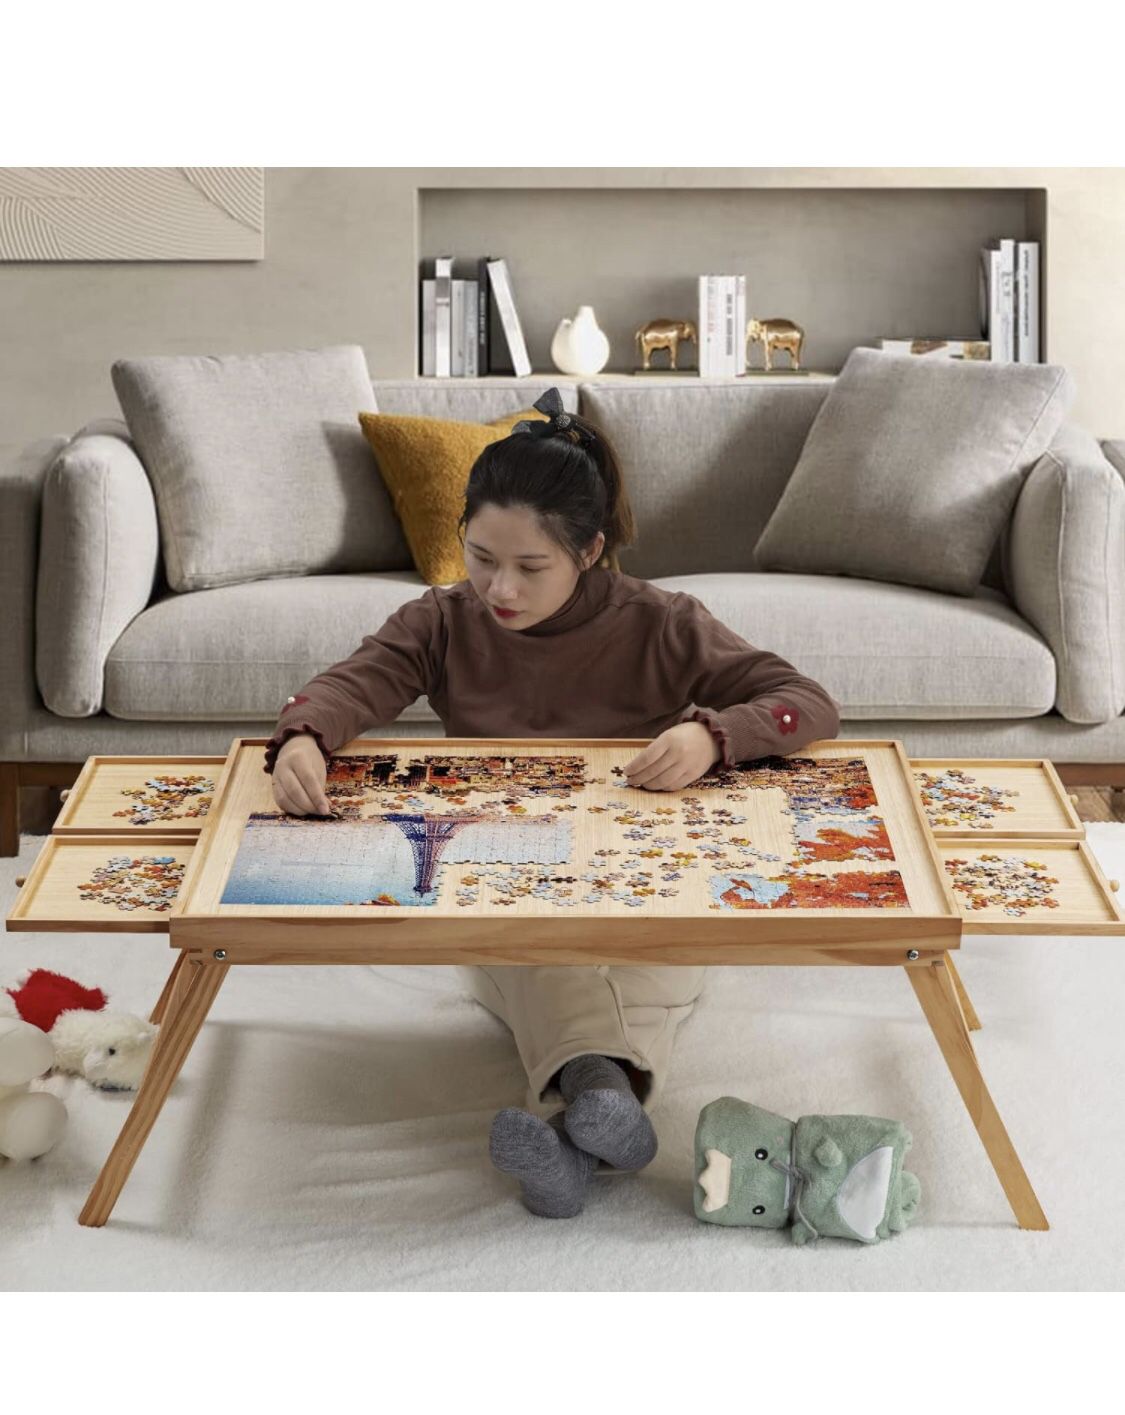 1500 Piece Wooden Jigsaw Folding Puzzle Board, Puzzle Table with Legs and Protective Cover, 34” X 26.3” Jigsaw Puzzle Board with 4 Drawers & Cover, Po